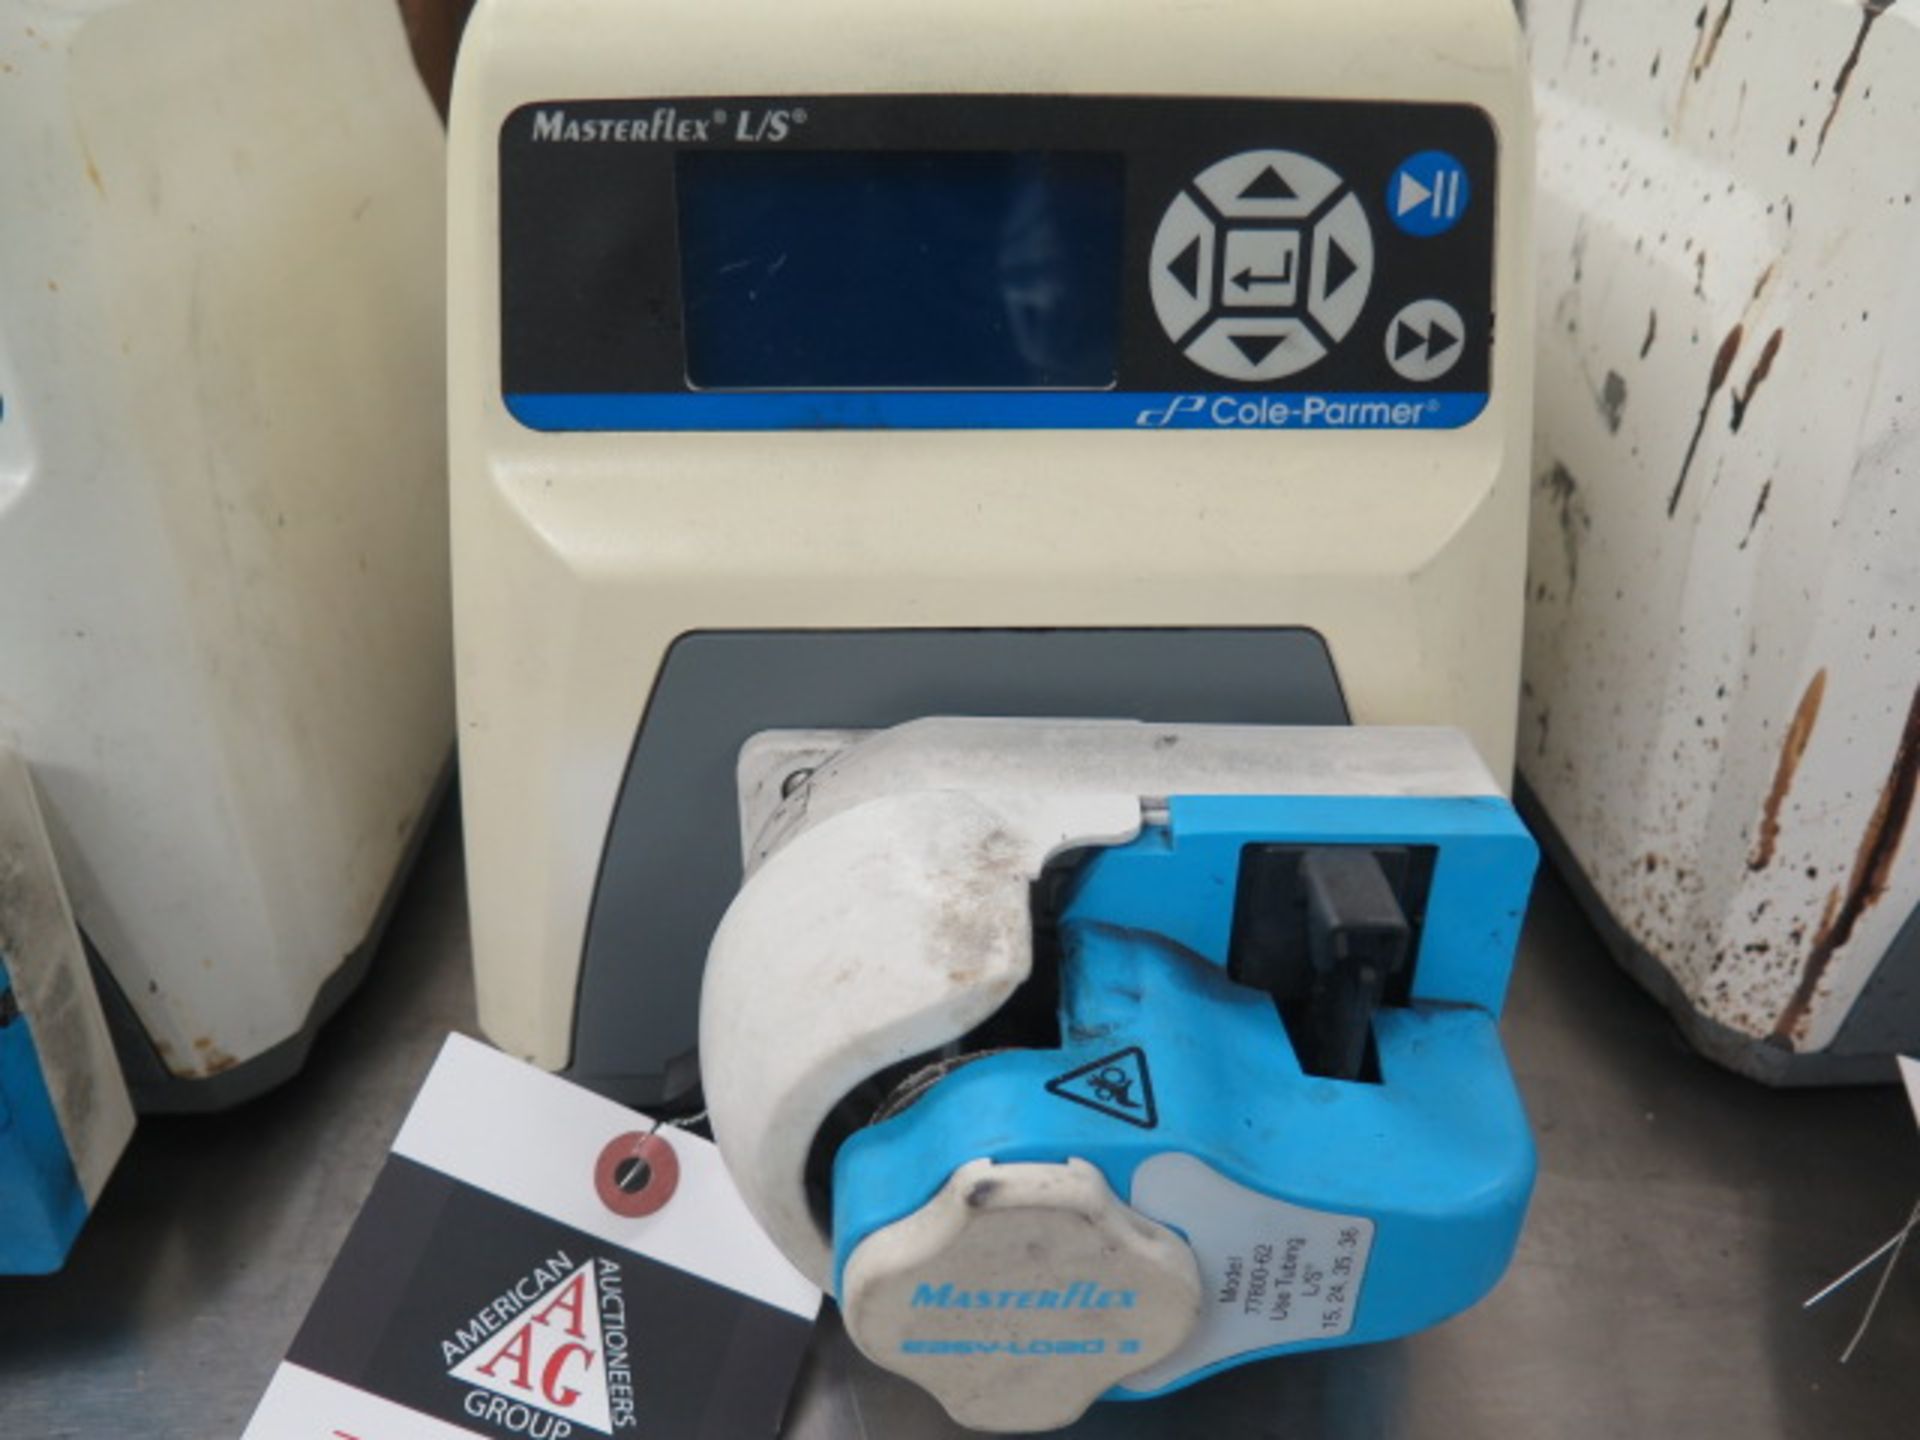 Cole-Parmer Masterflex L/S Peristaltic Pump, SOLD AS IS AND WITH NO WARRANTY - Image 2 of 4